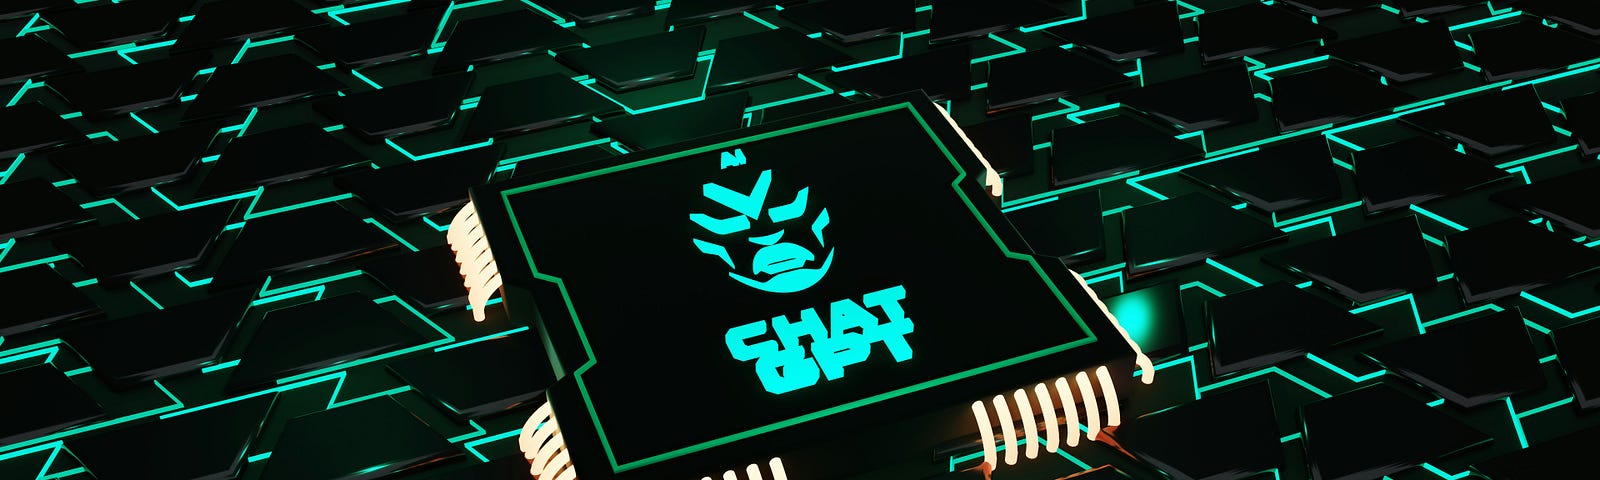 Computer chip labeled “CHAT GPT”